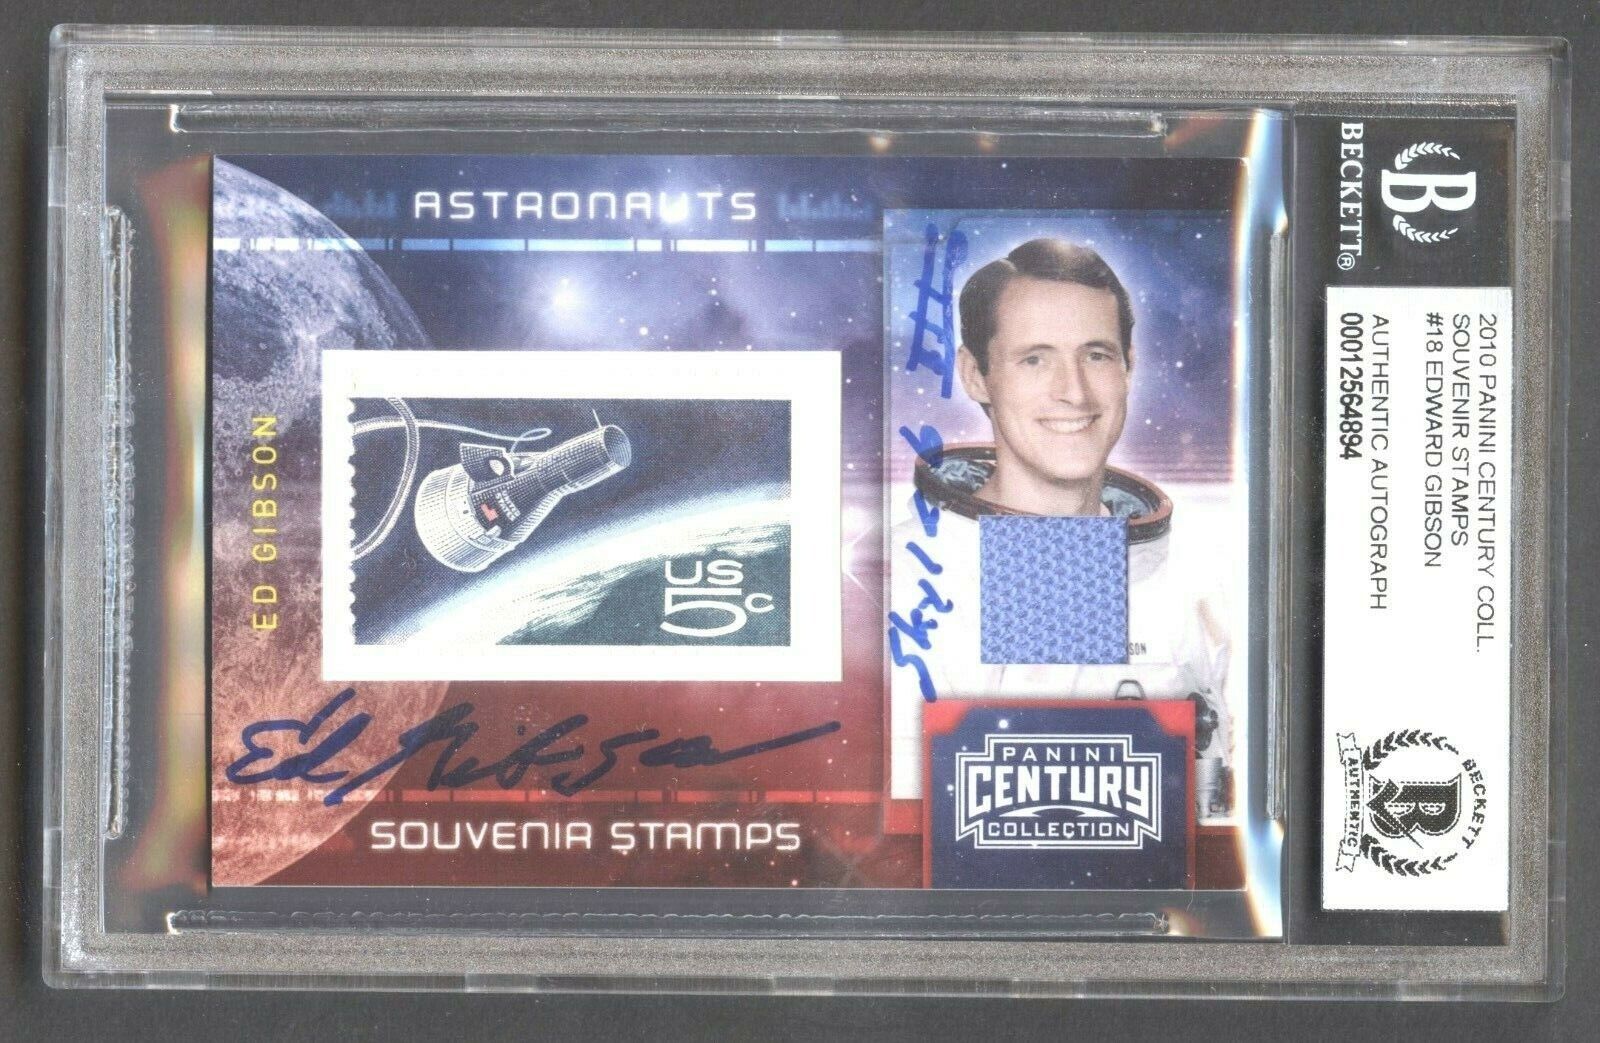 Edward Gibson #18 signed autograph auto 2010 Panini Astronauts Stamps Card BAS